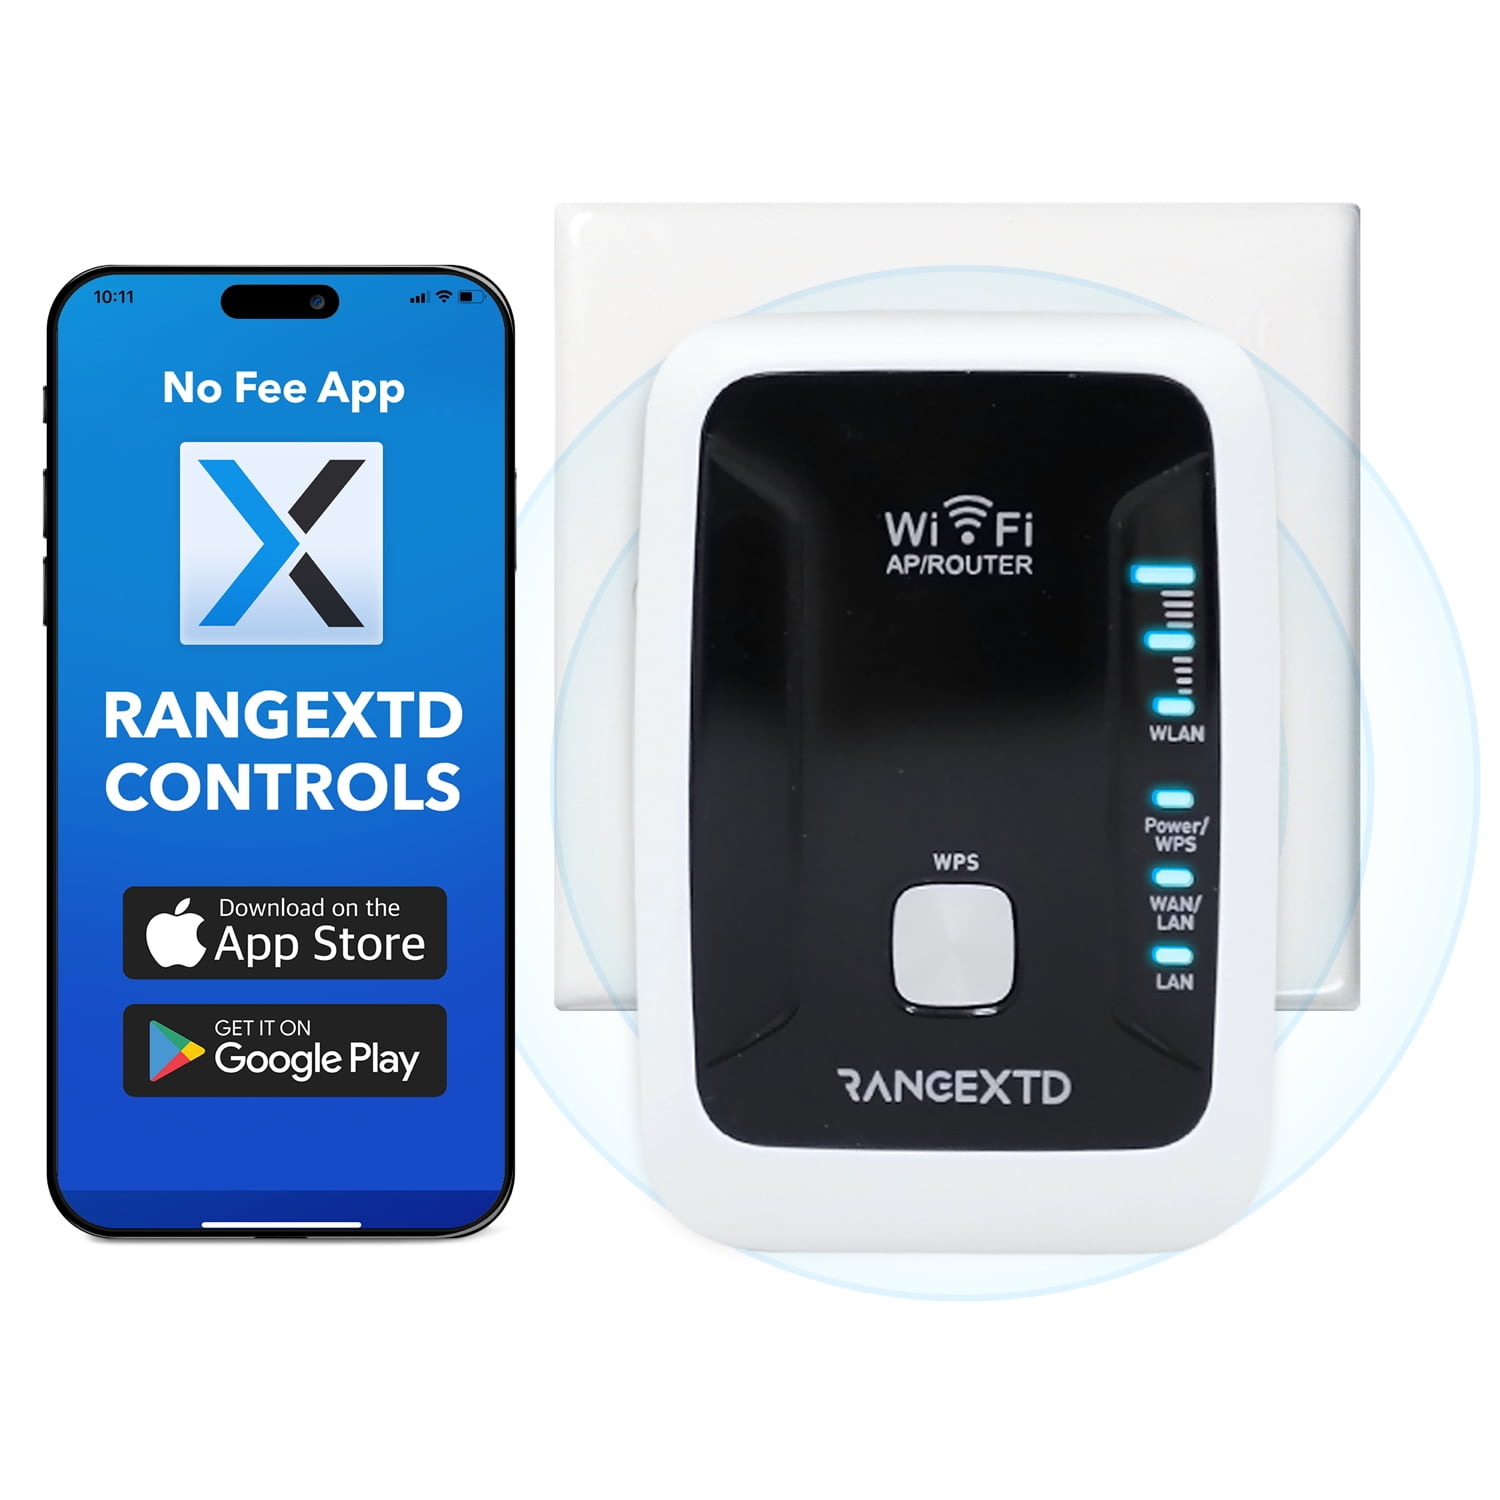 RangeXTD WiFi Extender Up To 300mbps 2.4GHz WiFi Booster, Router, and Wireless Access Point Removes Dead Zones Extends WiFi Signal - Walmart.com